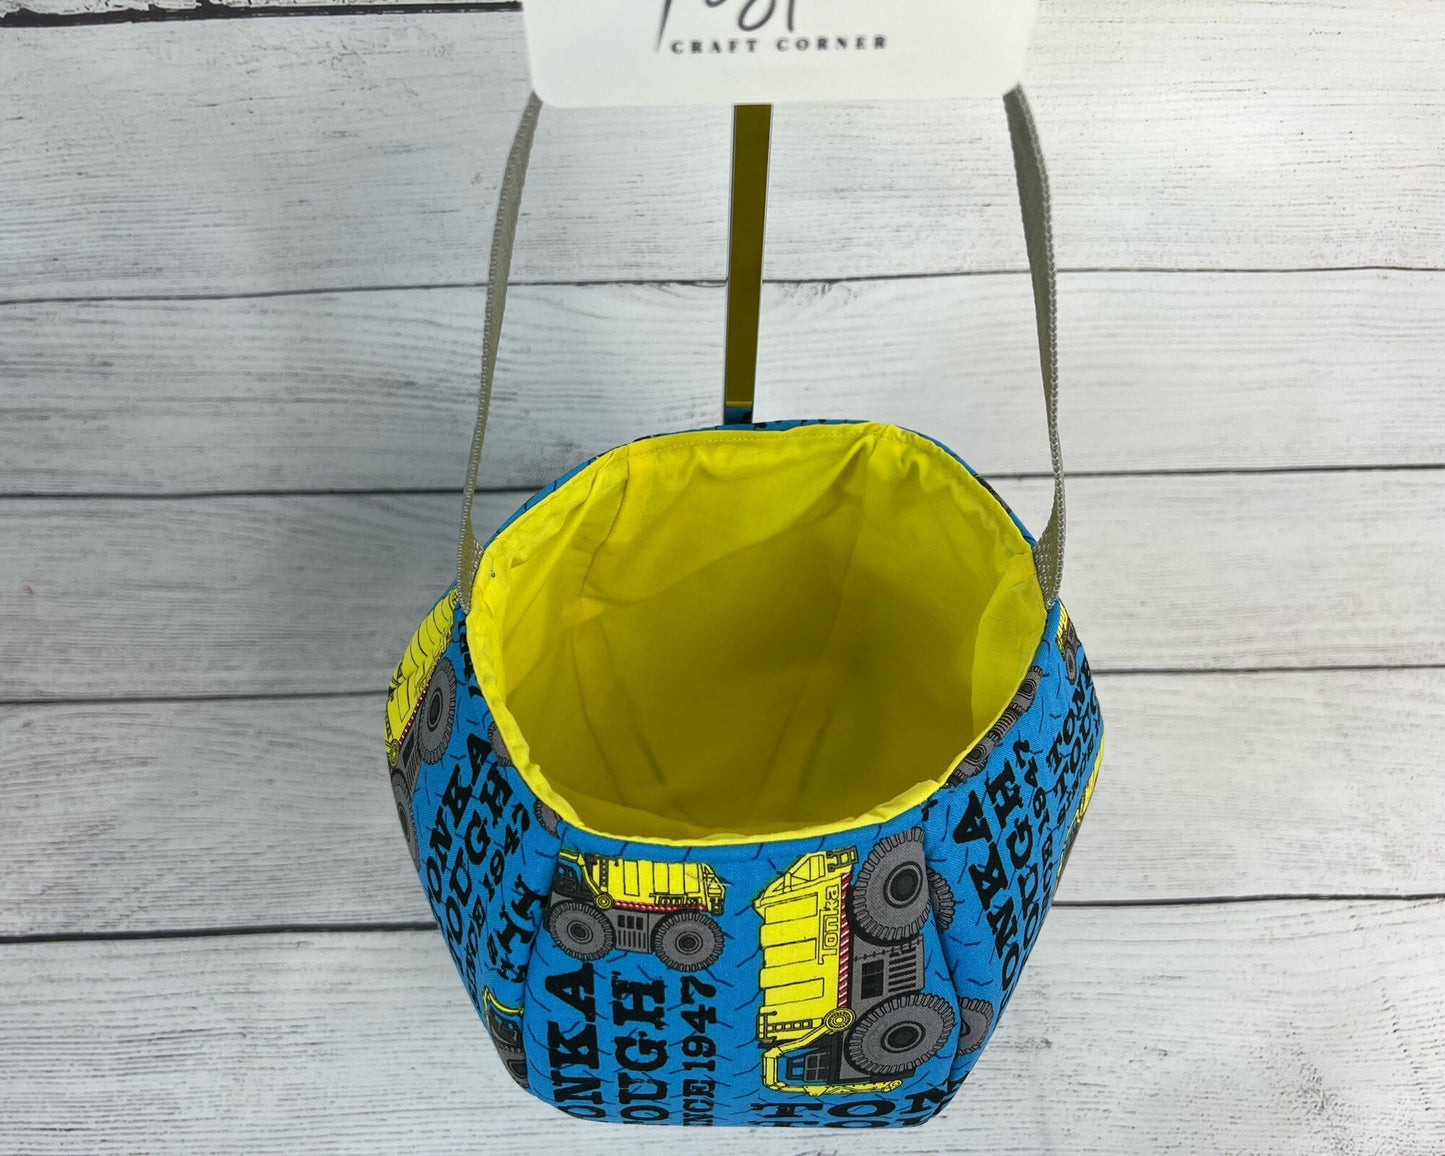 Construction Truck Bag - Tote -  Tough - Yellow Dump Truck - Toys - Monster Truck -  Gift - Everyday - Holiday - Easter - Halloween - Party